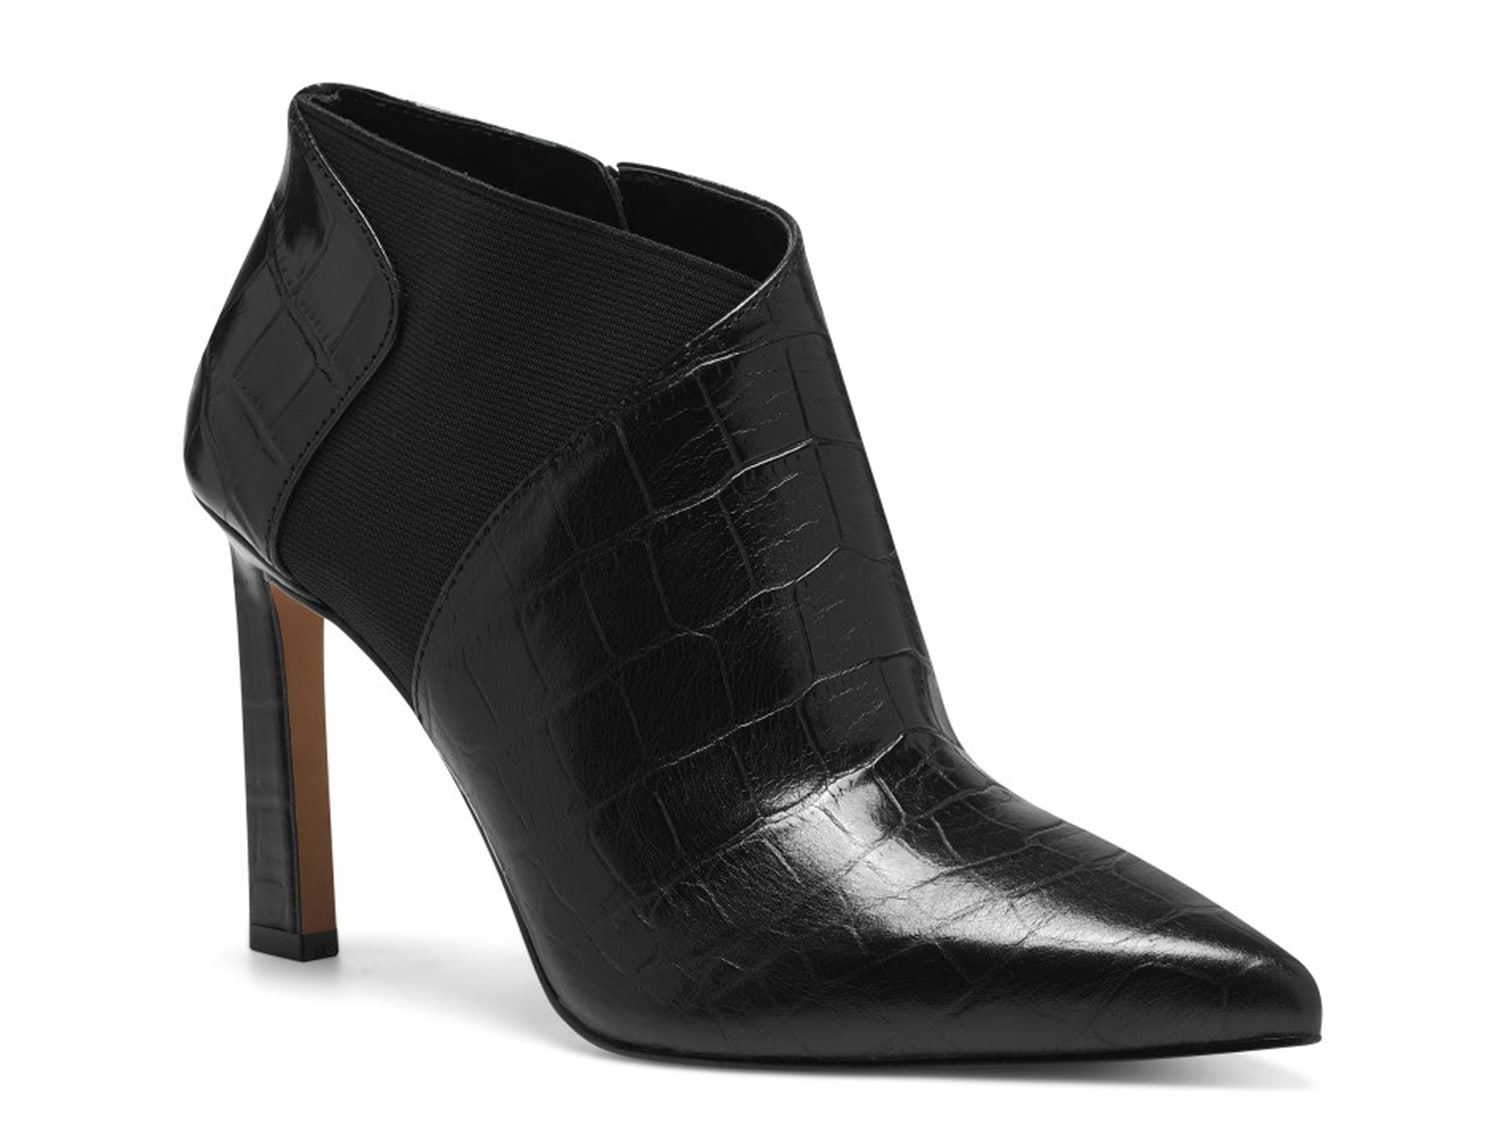 Vince Camuto Sindarah Bootie - Free Shipping | DSW